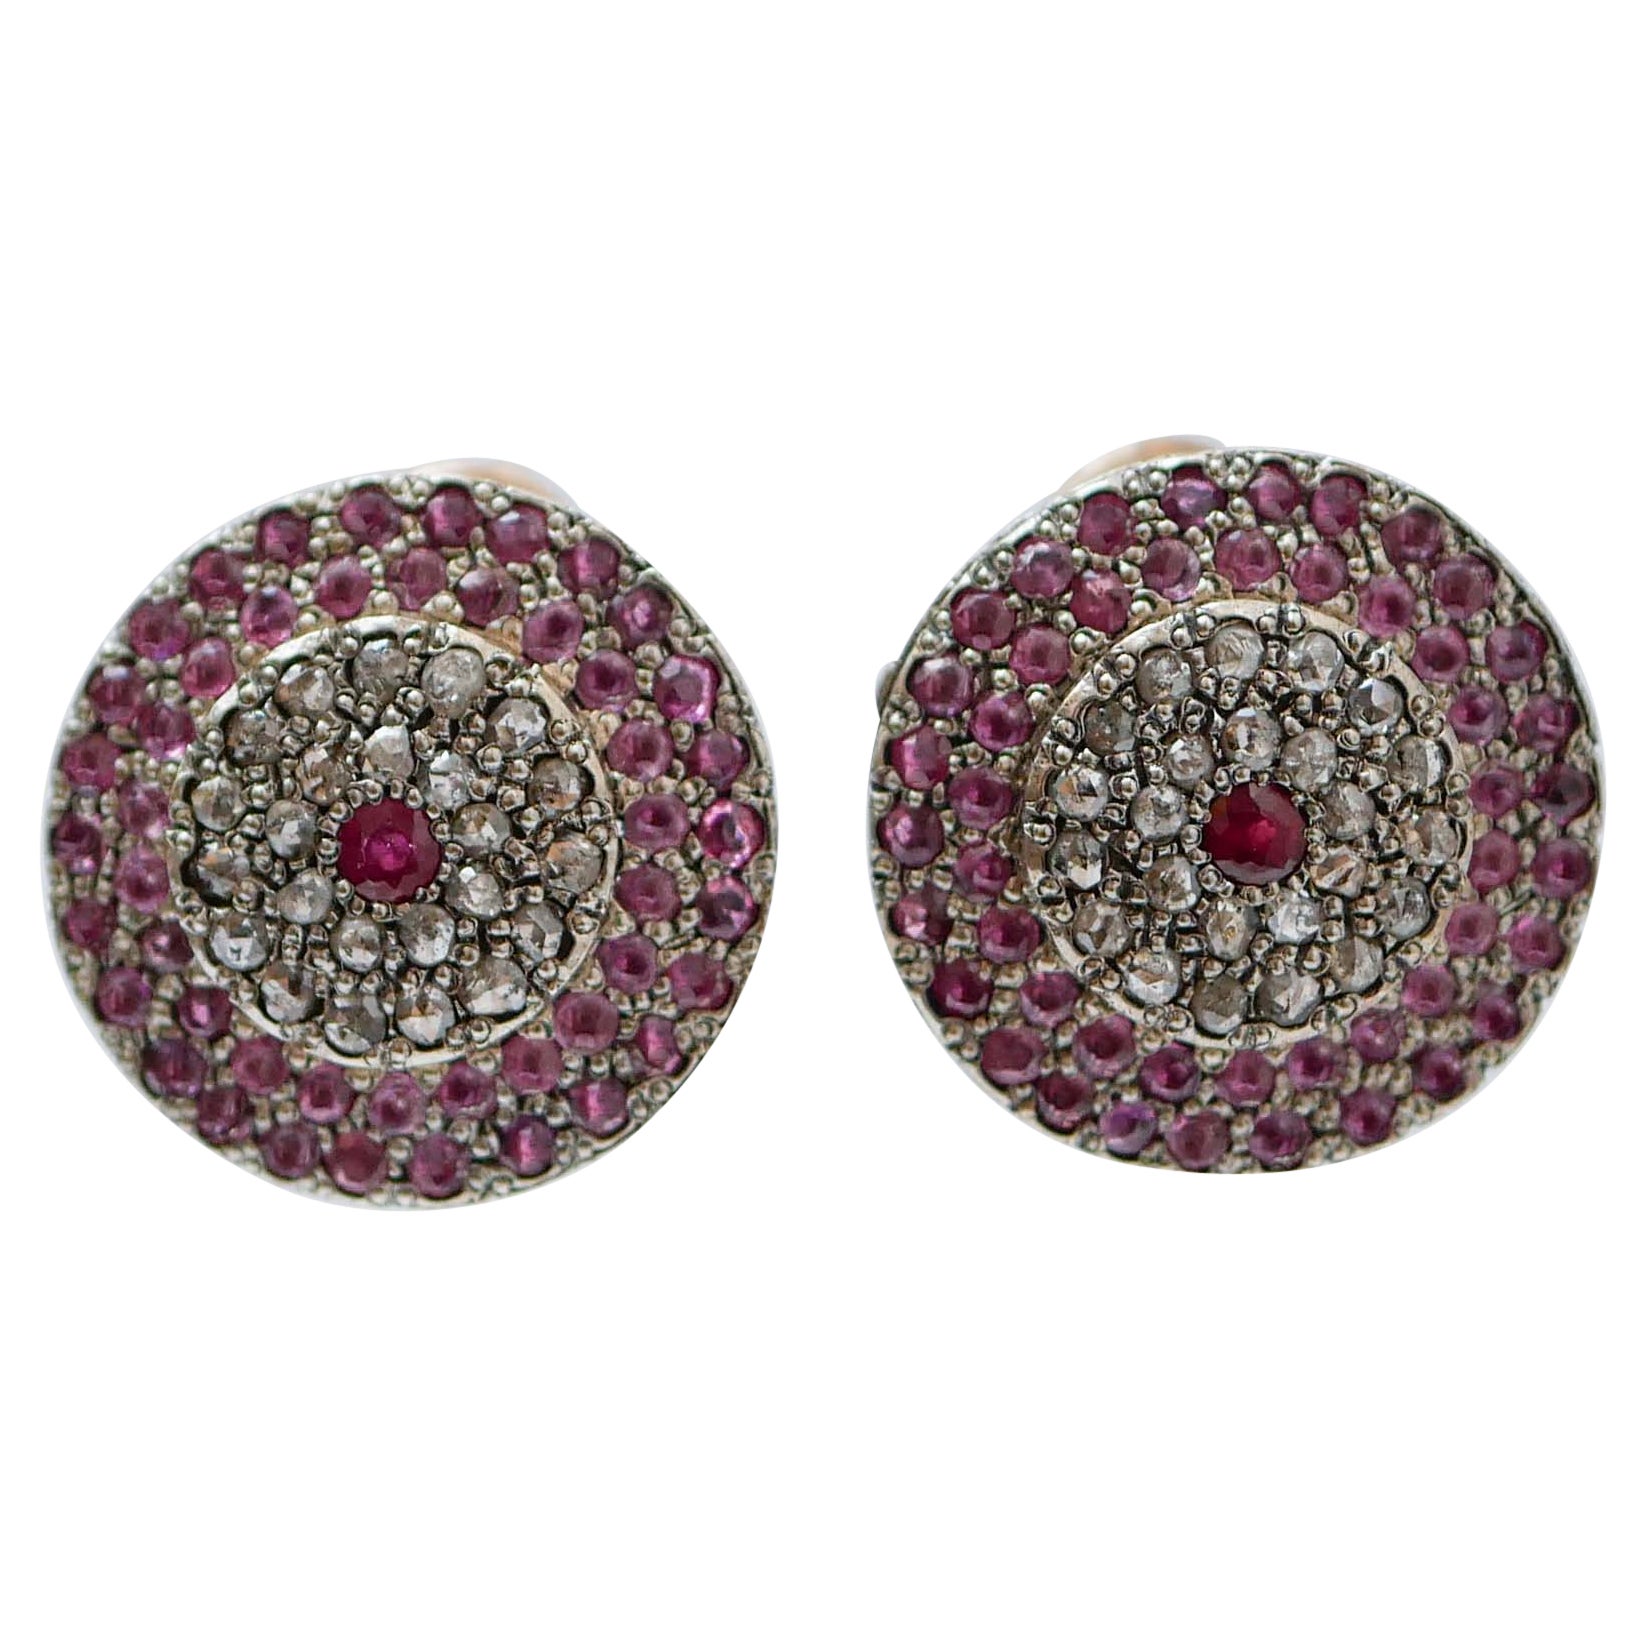 Rubies, Diamonds, Rose Gold and Silver Earrings